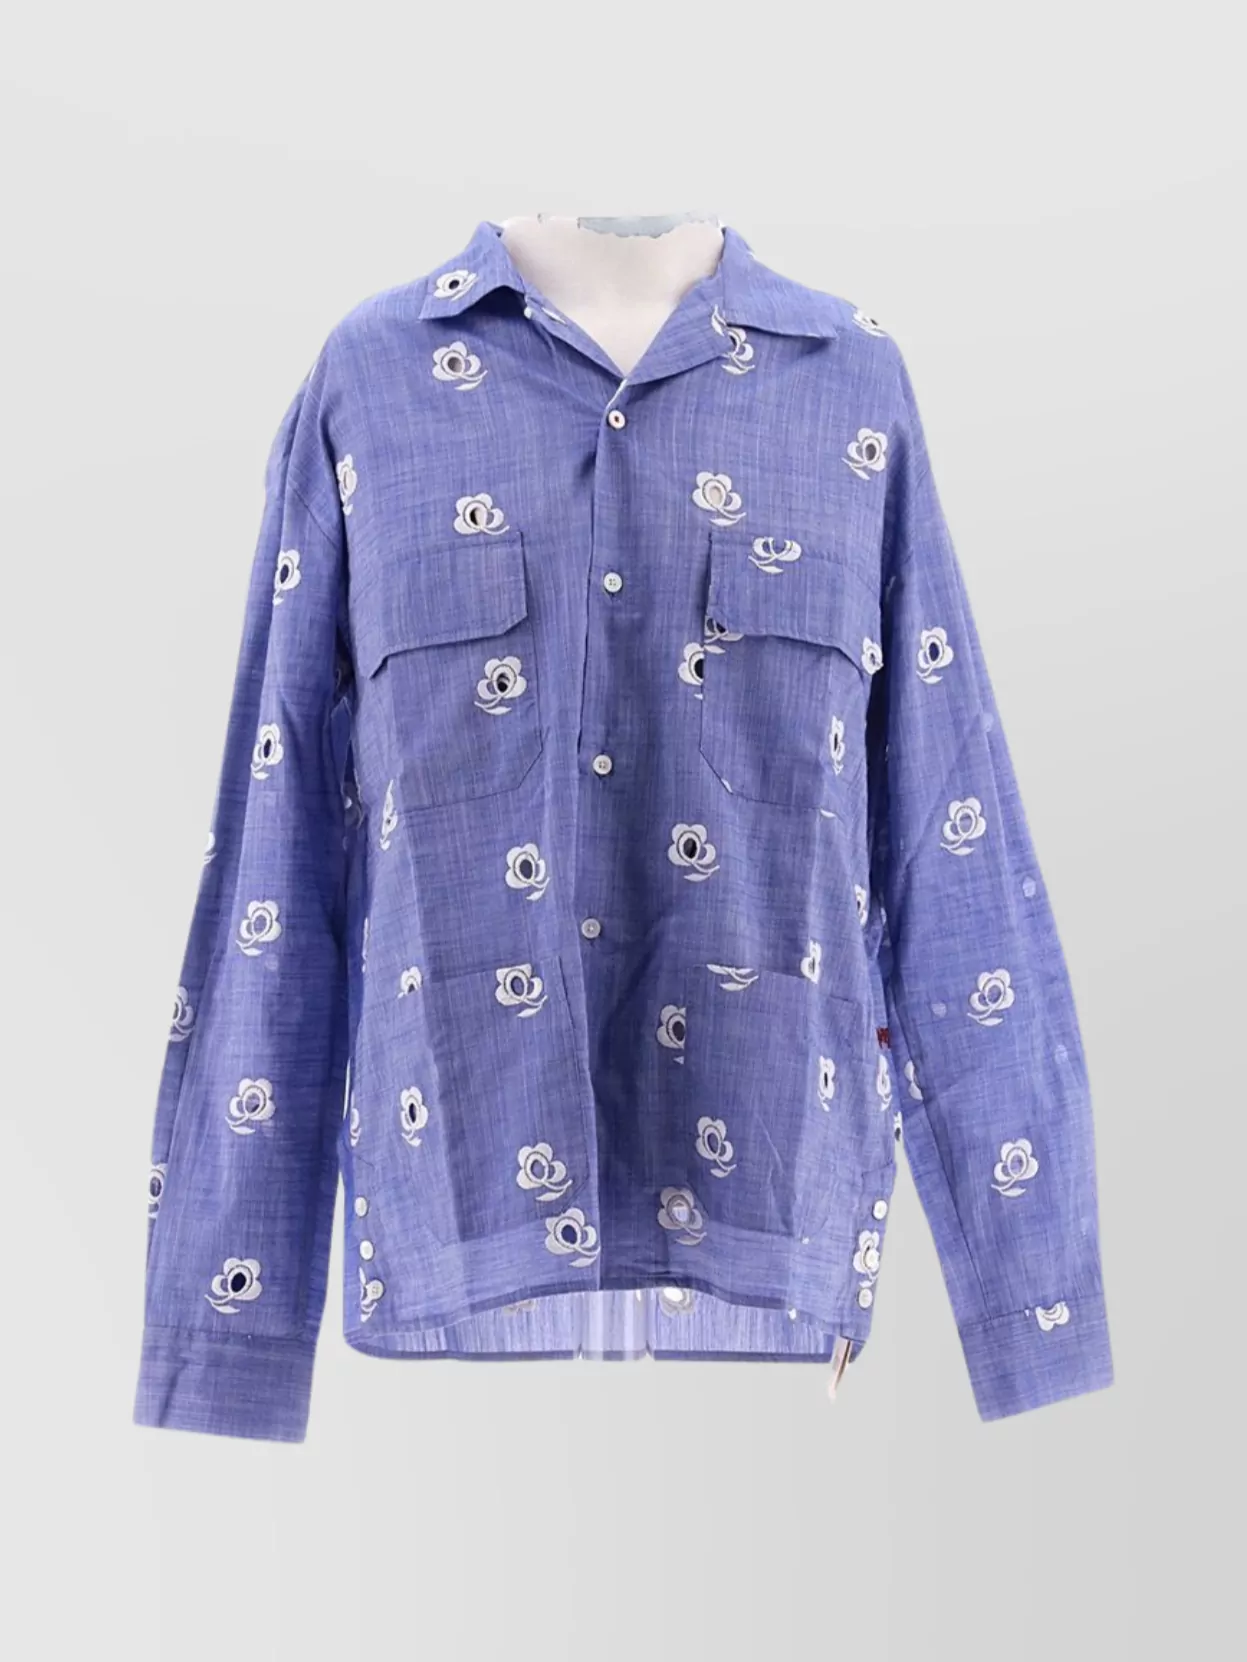 Baziszt Shirt Chest Pockets Cuffed Sleeves Floral Pattern In Purple